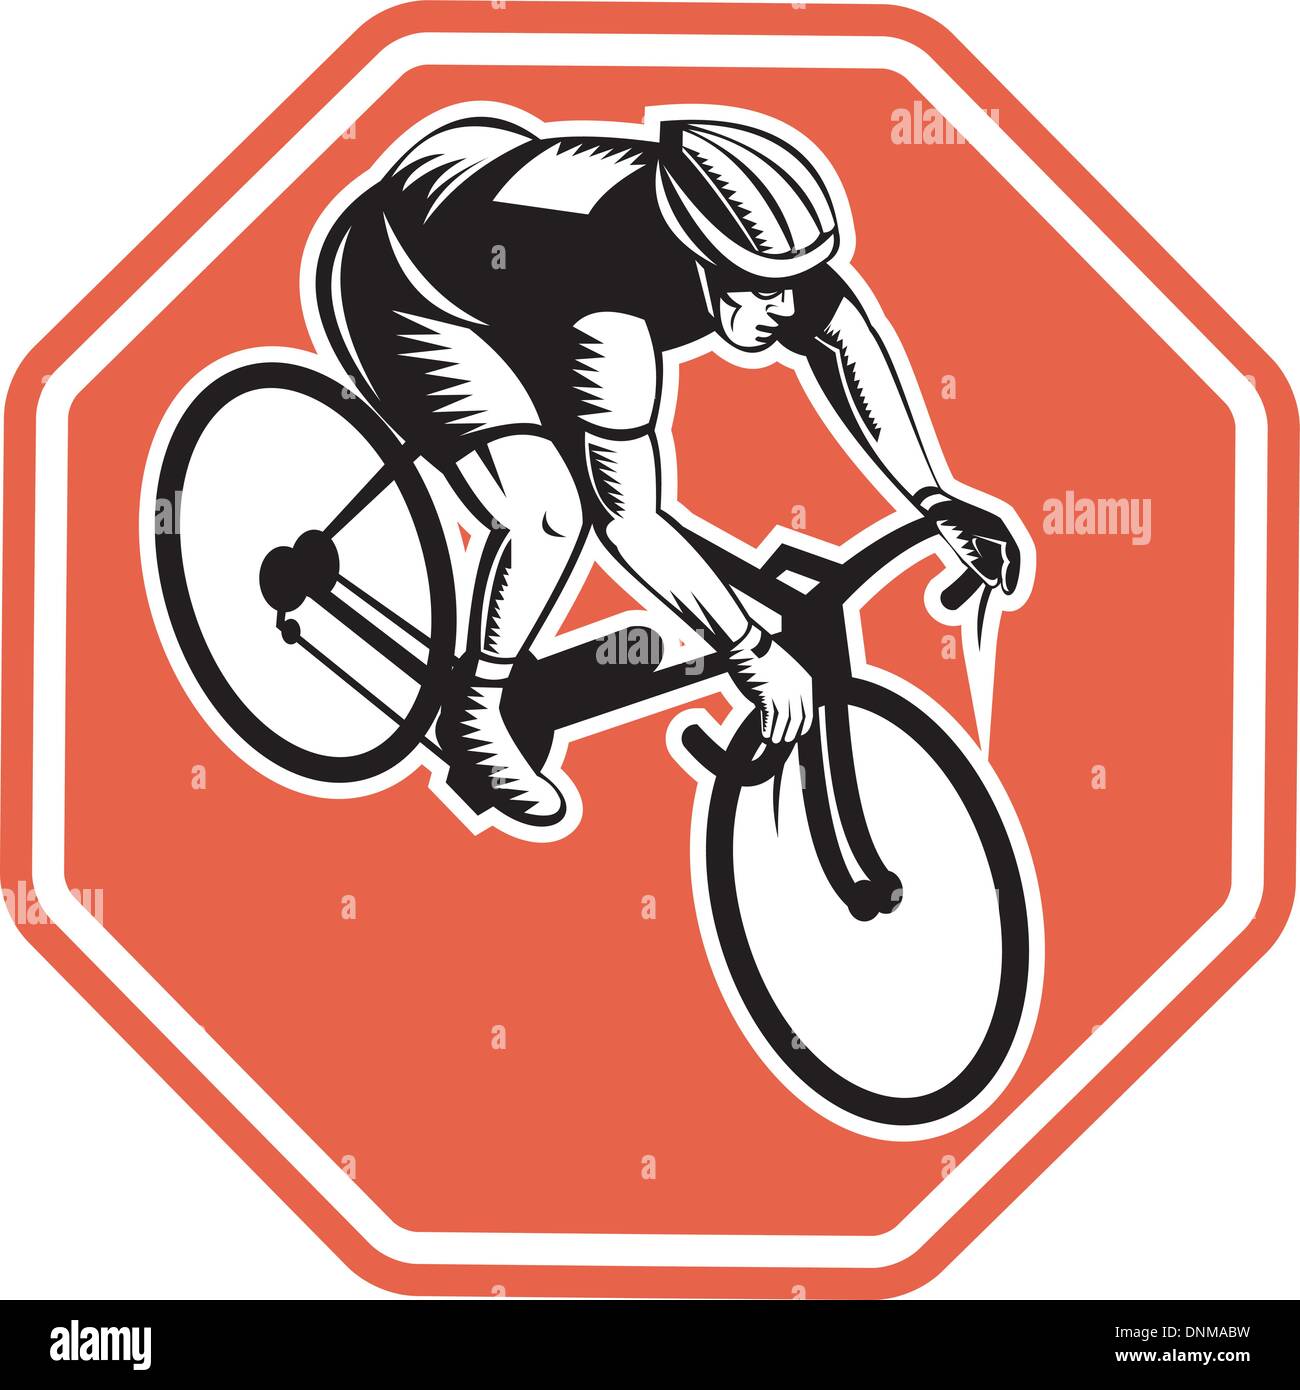 illustration of a Cyclist racing bike set inside octagon viewed from high angle done in retro woodcut style Stock Vector